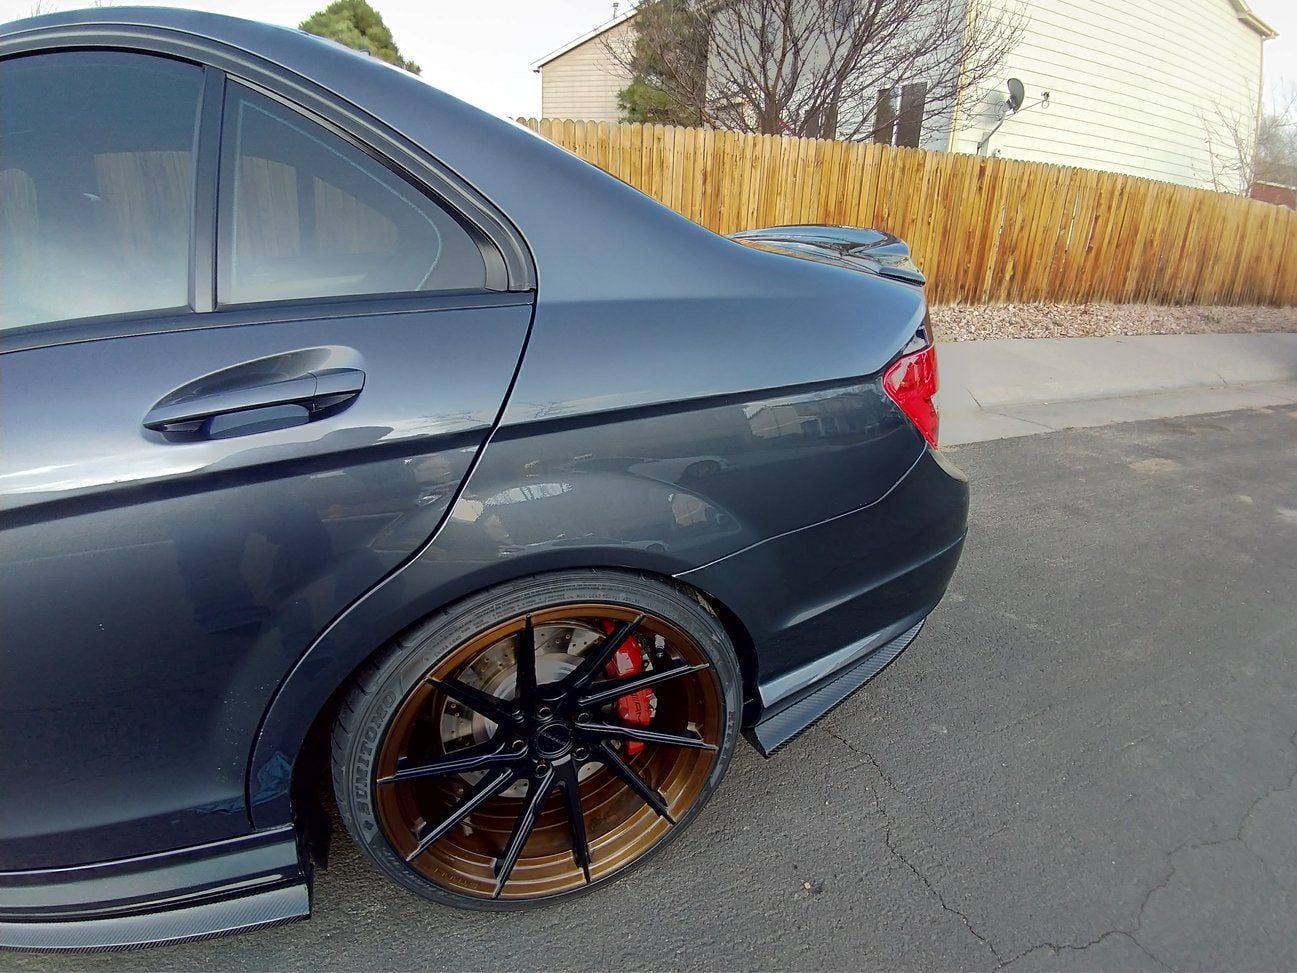 Wheels and Tires/Axles - Stance SF01 19x9.5 Wheels for W204. Matte Black Center, Brushed Bronze Lip/Barrels - New - 2008 to 2014 Mercedes-Benz C63 AMG - 2008 to 2014 Mercedes-Benz C300 - Denver, CO 80233, United States